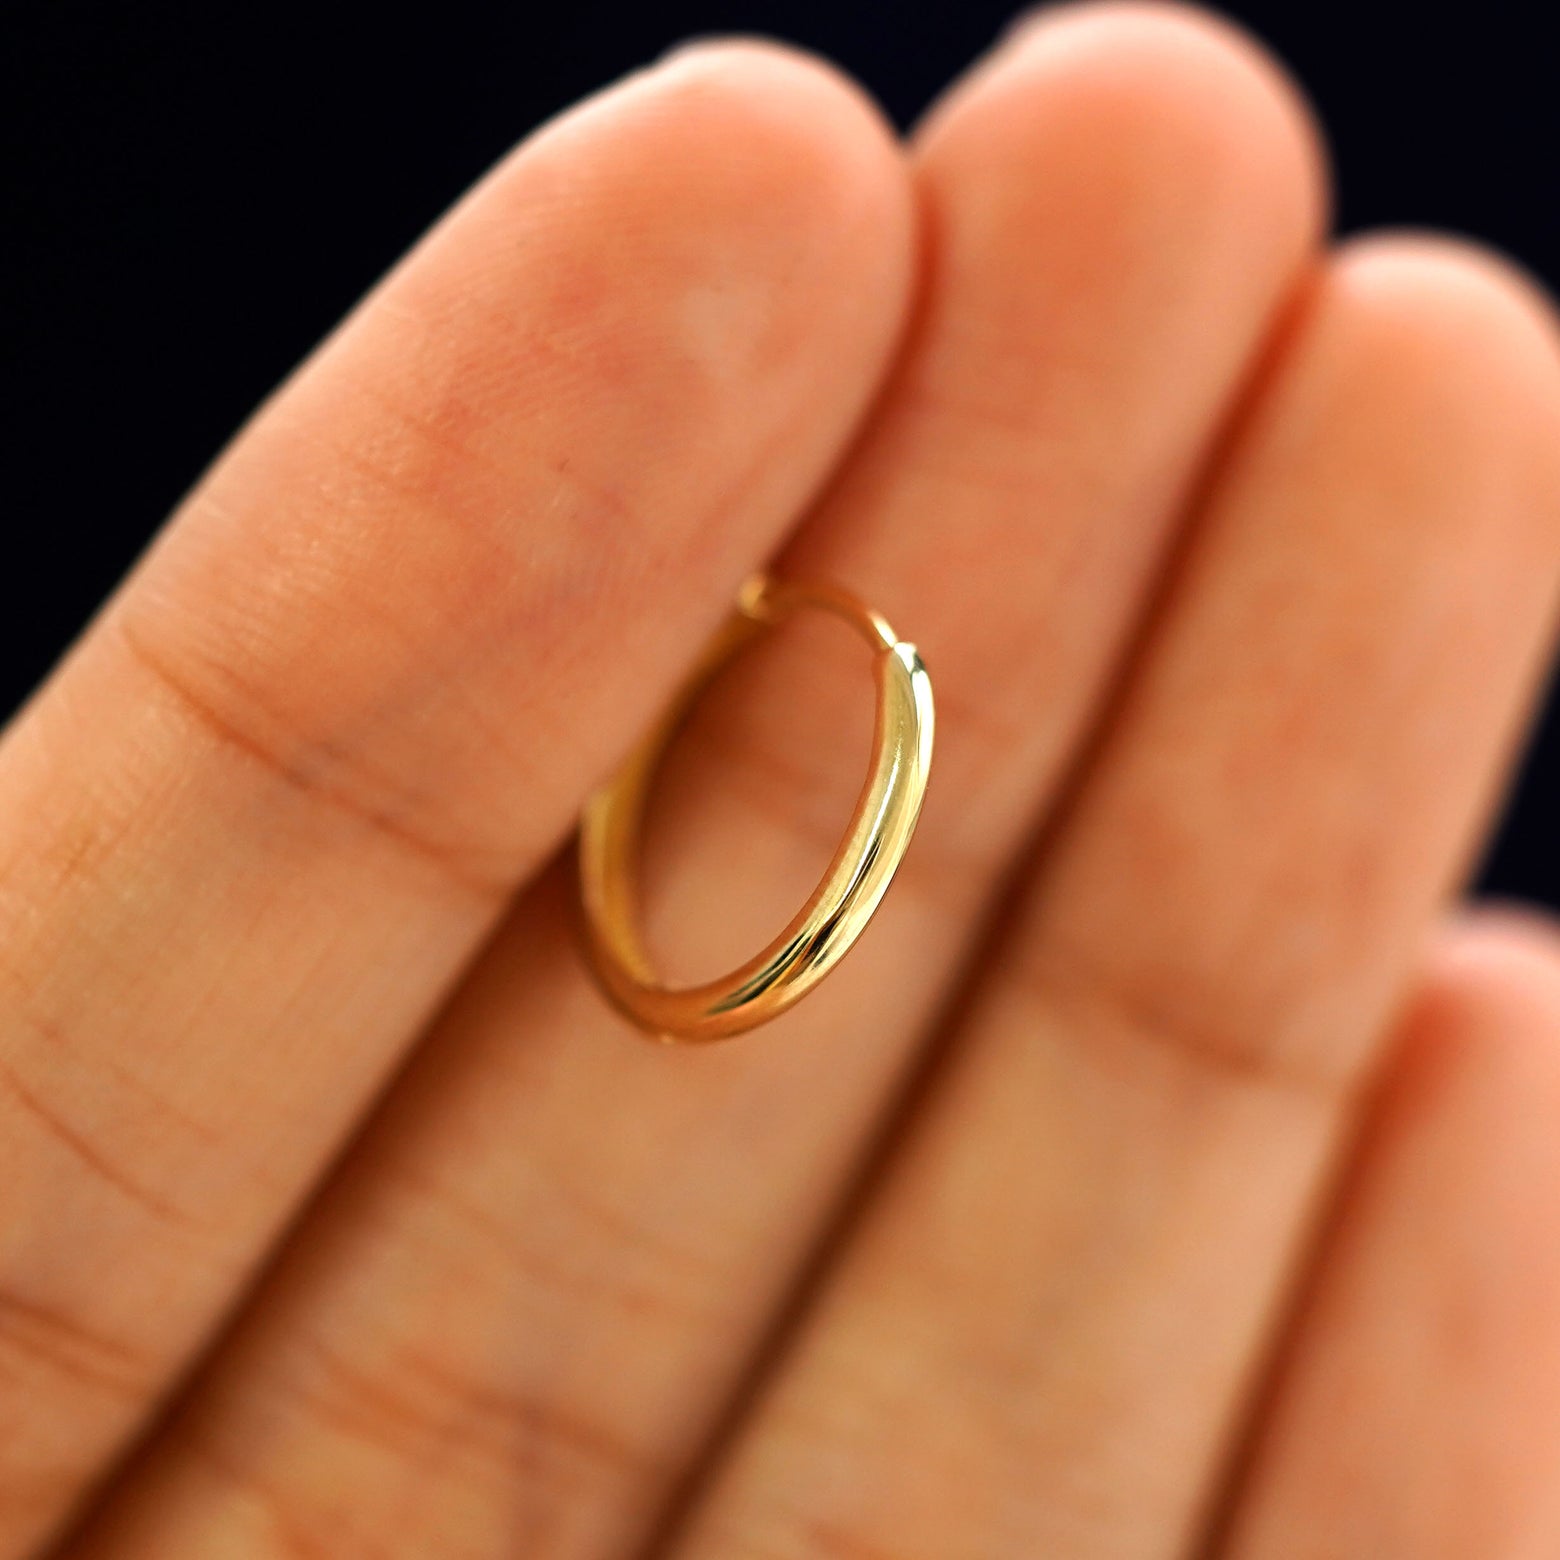 A 14k gold Medium Curvy Huggie Hoop Earring held in between a model's fingers to show the hoops thickness